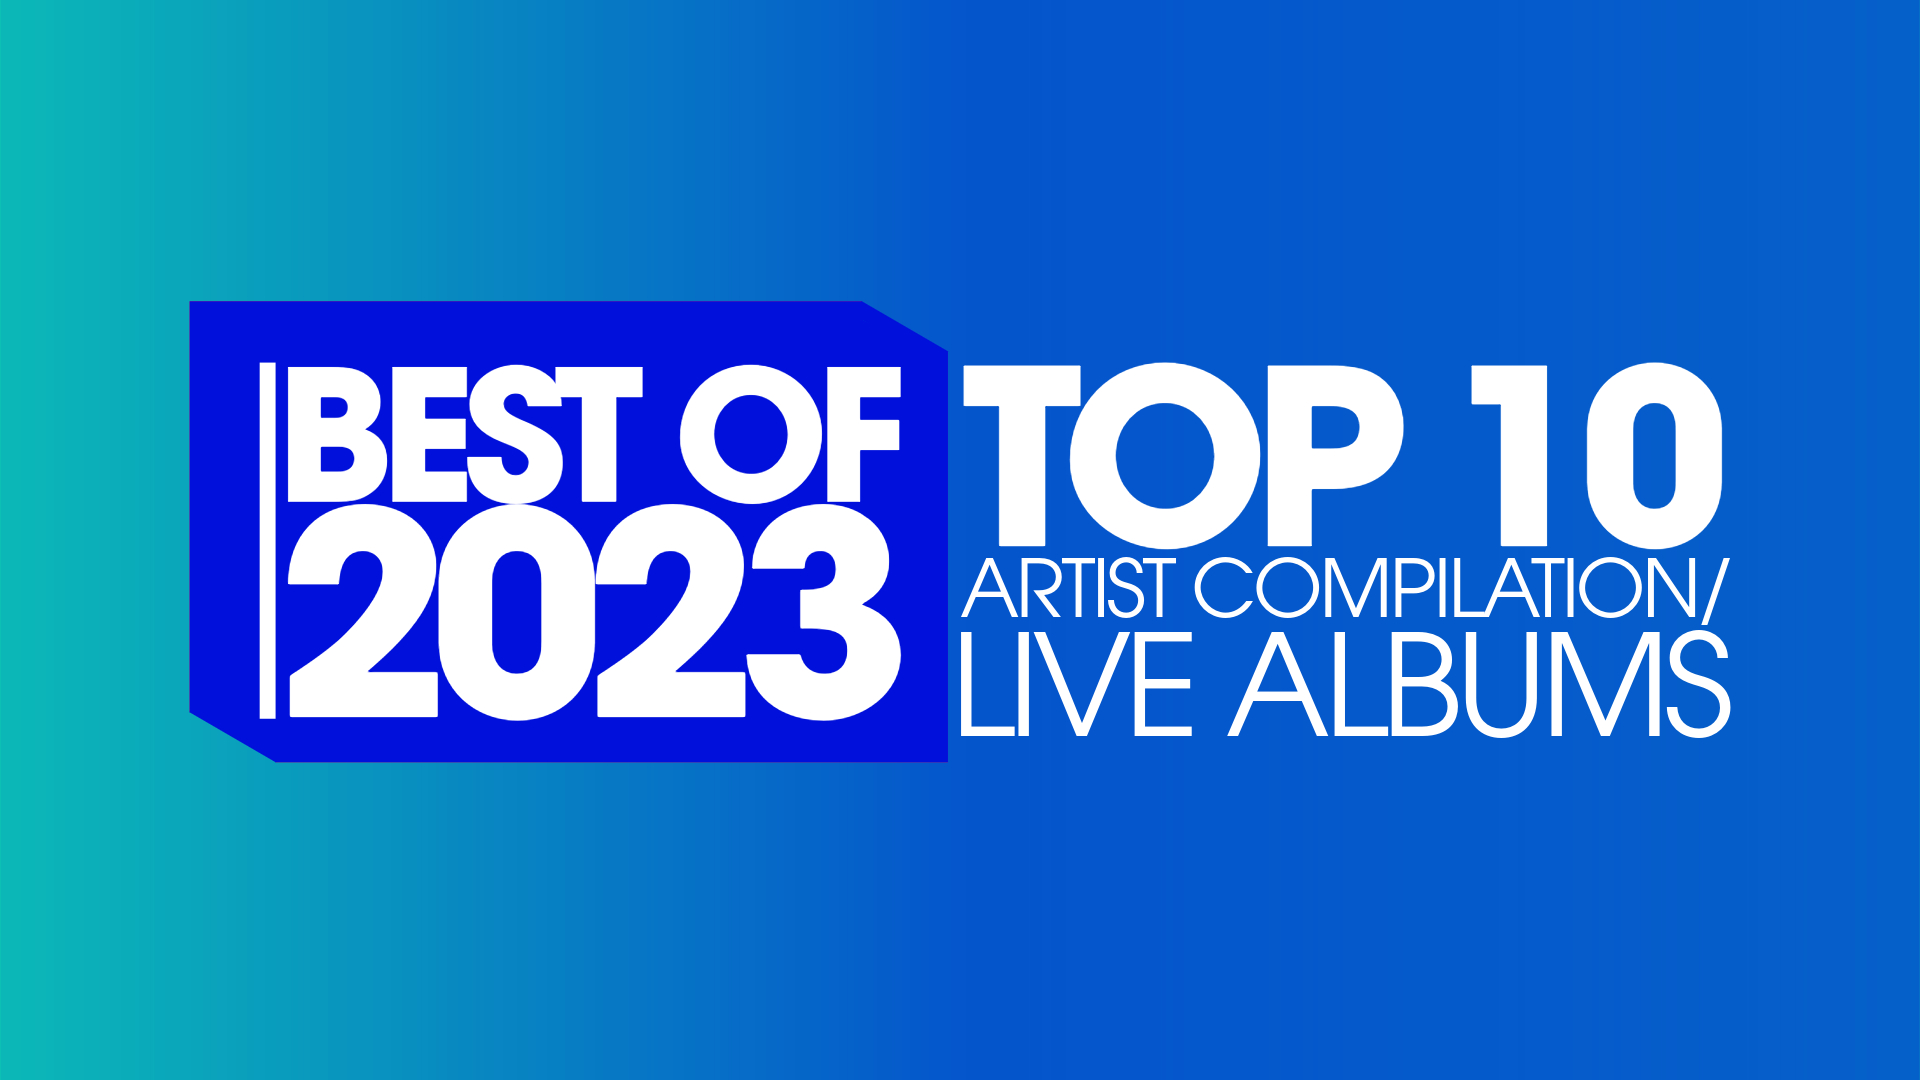 Best albums of 2023: See the top 10 list